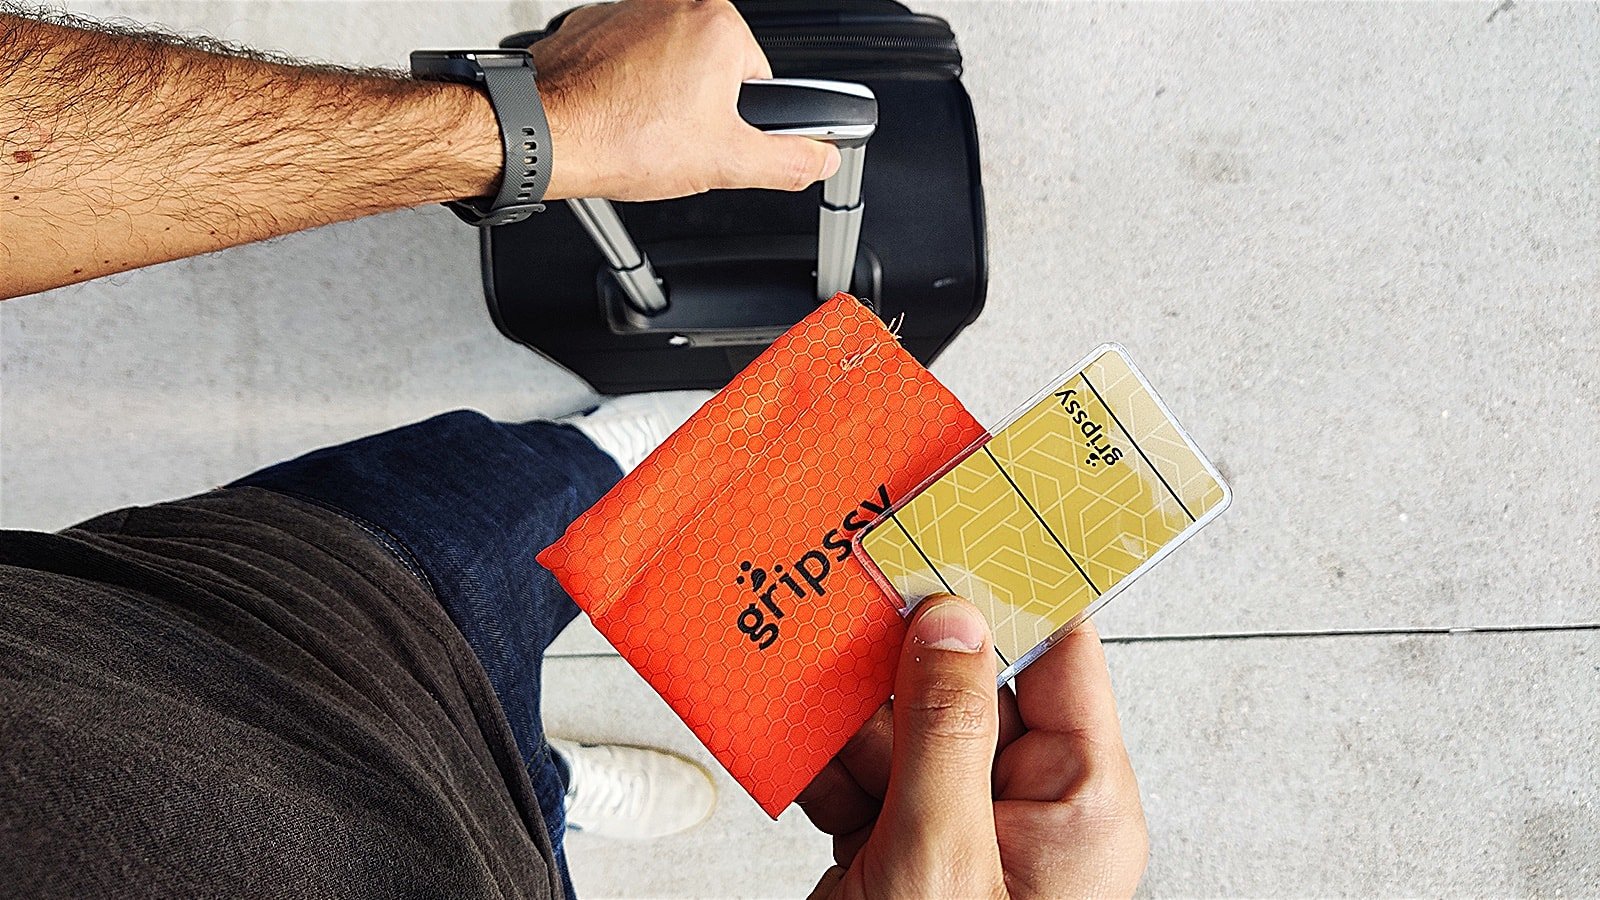 Gripssy nano-tech phone holder sticks to your device and holds it in place during travel